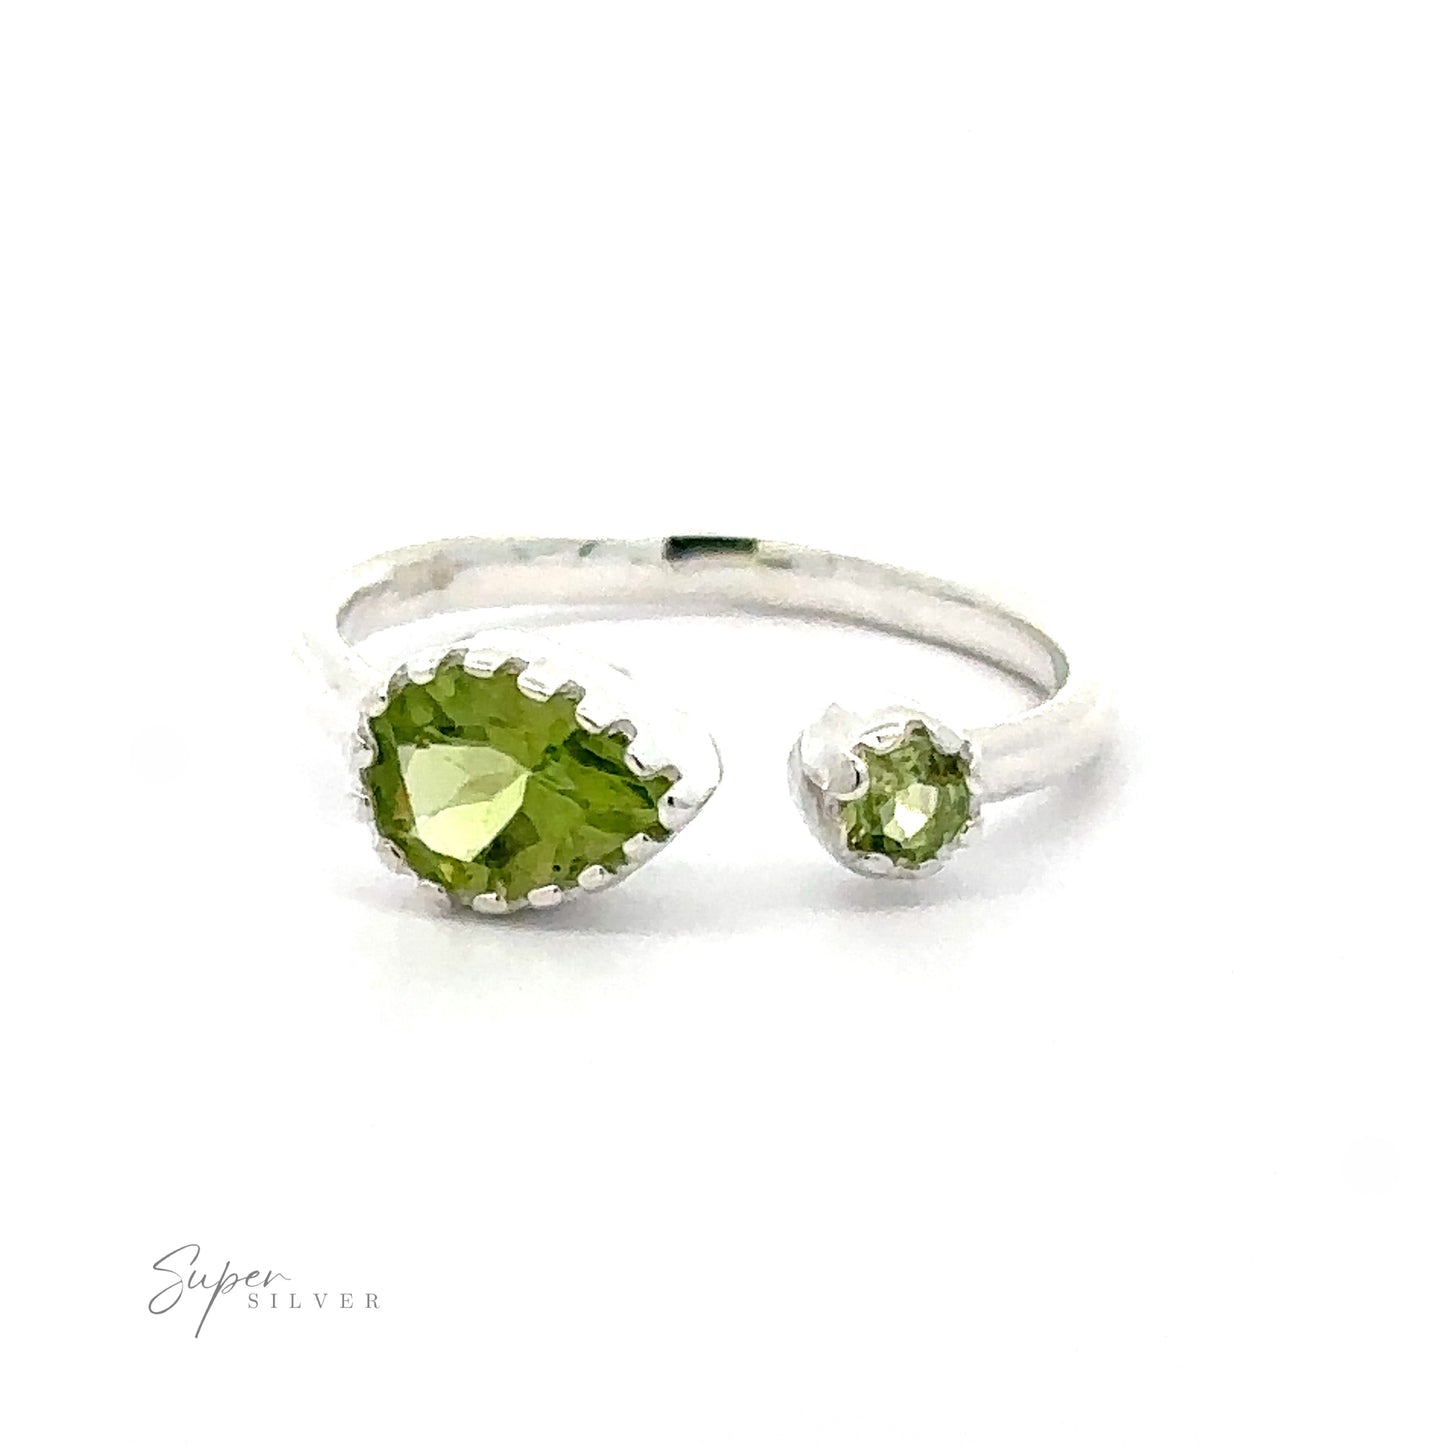 
                  
                    Dainty Adjustable Gemstone Ring with Two Stones, featuring a large pear-shaped peridot and a smaller round peridot, set against a white background.
                  
                